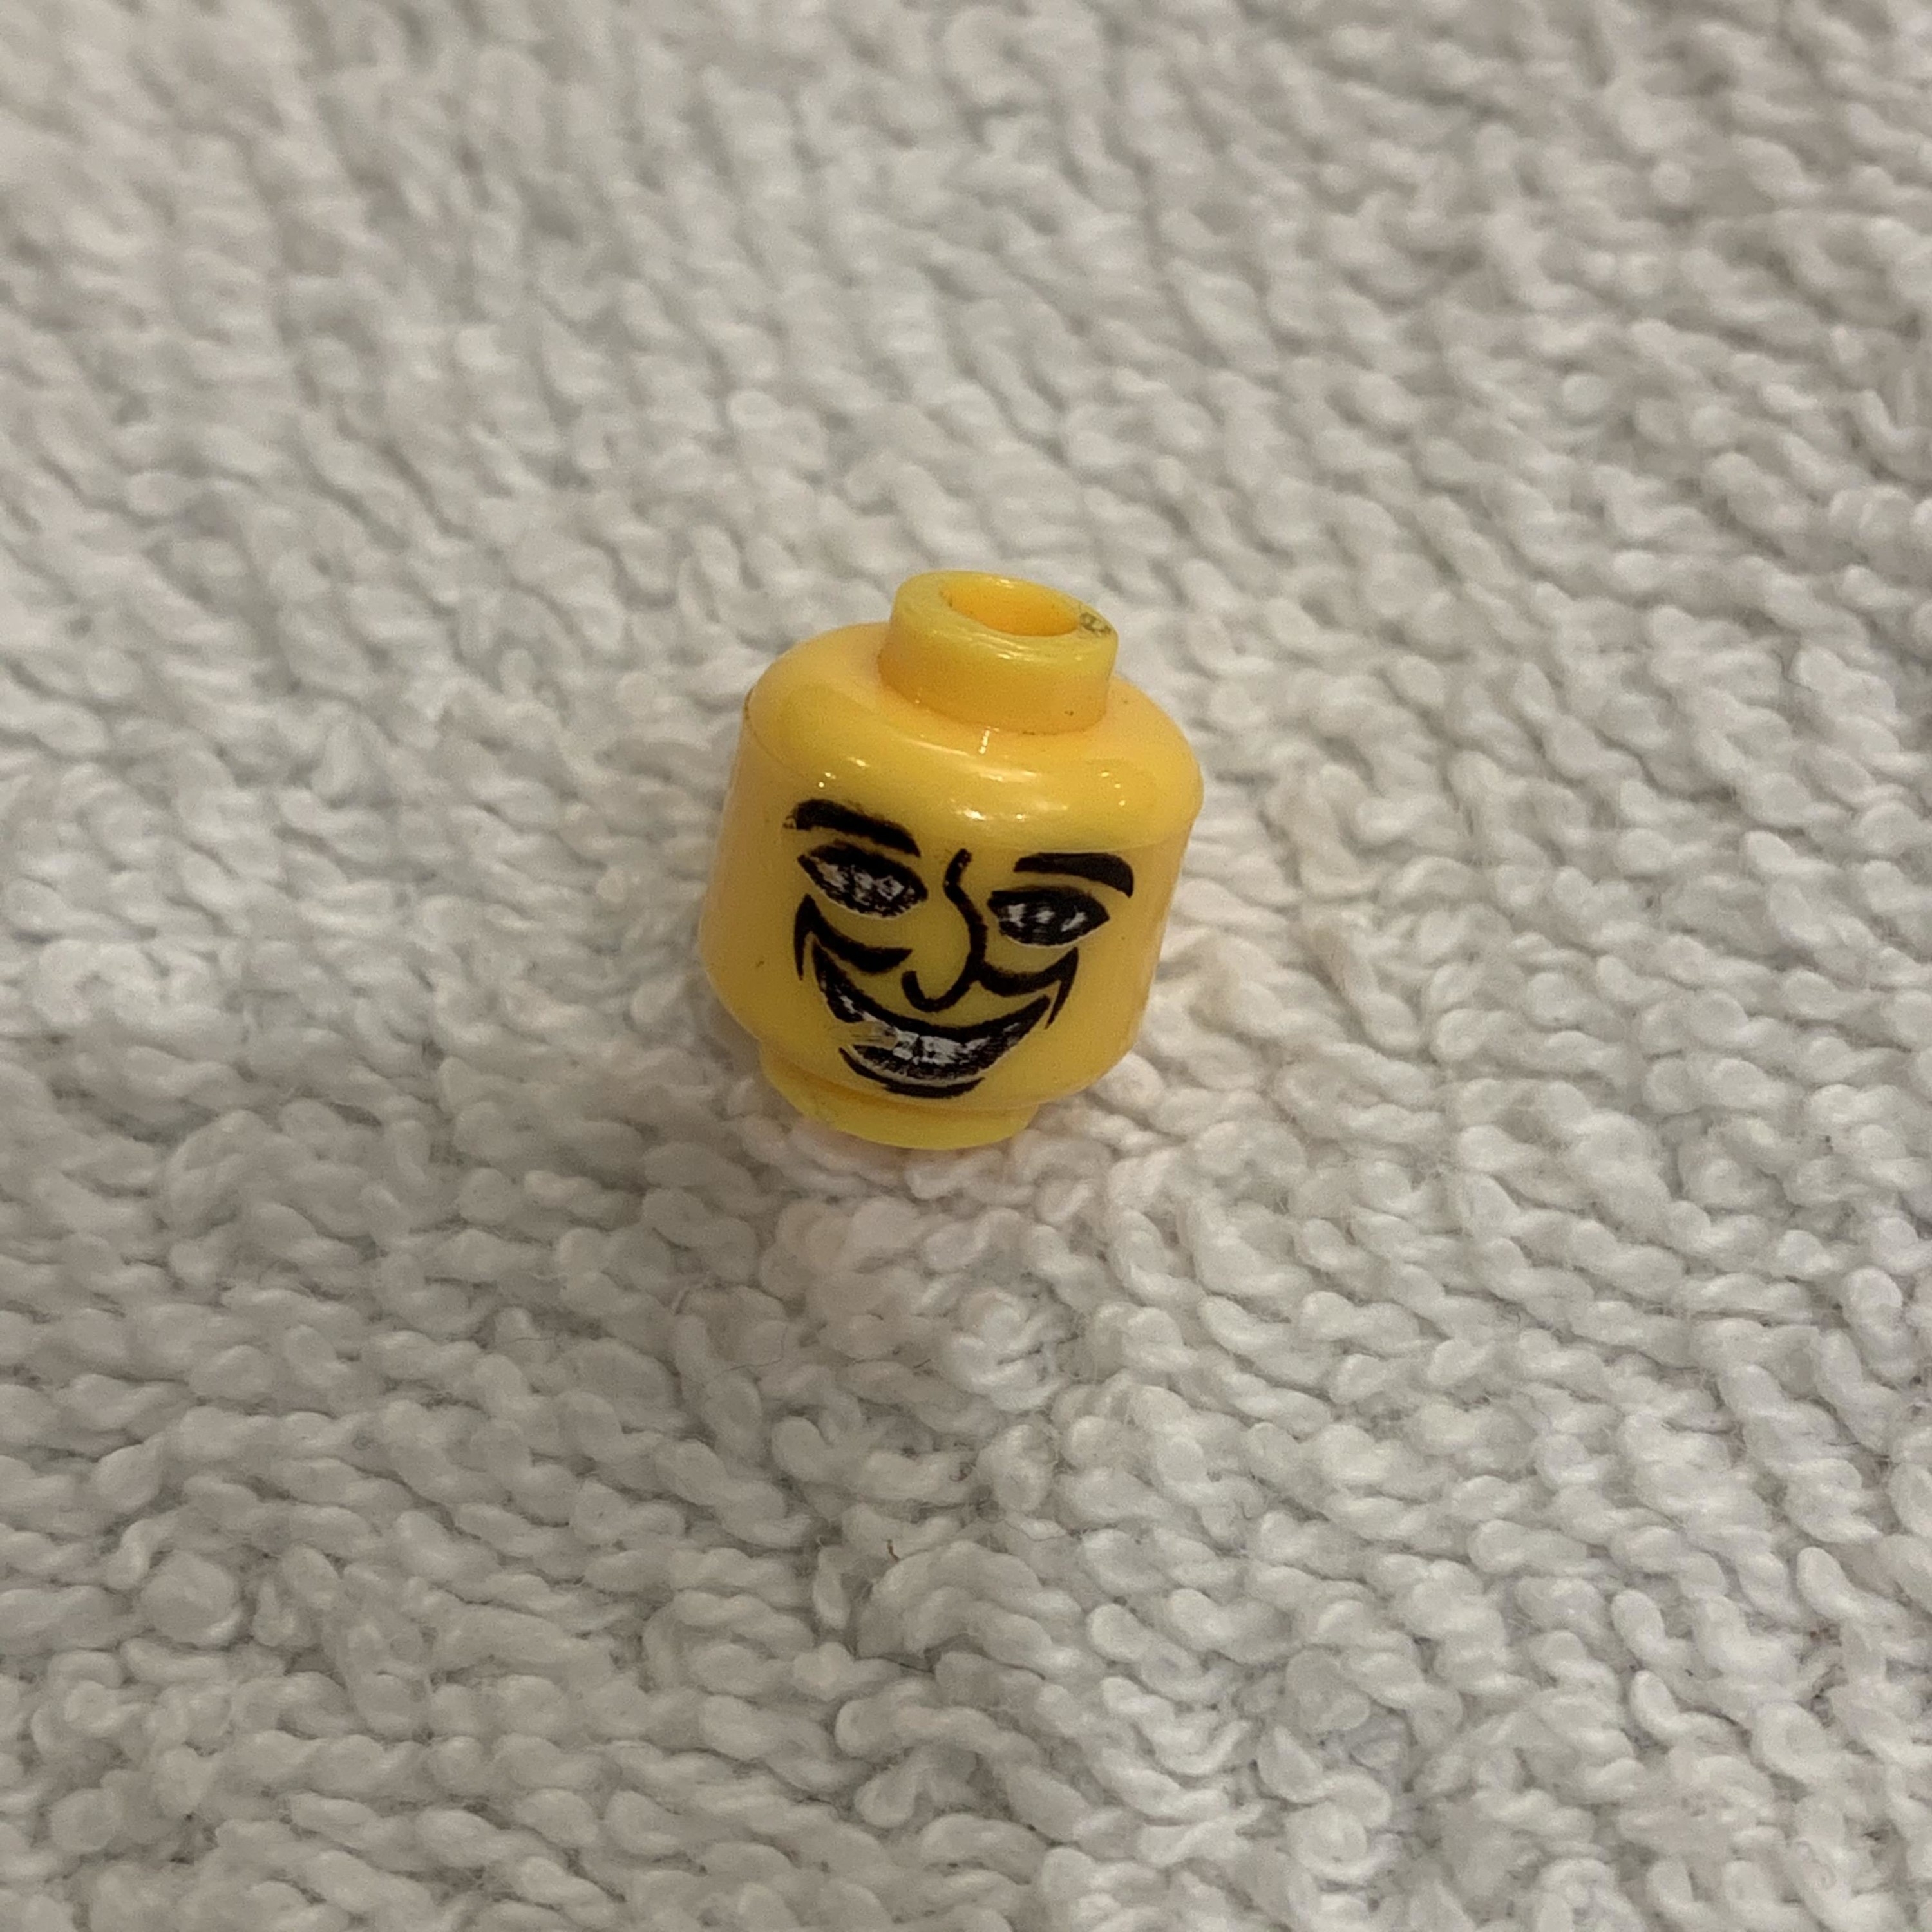 A lego person head that has a large grin and wide eyes